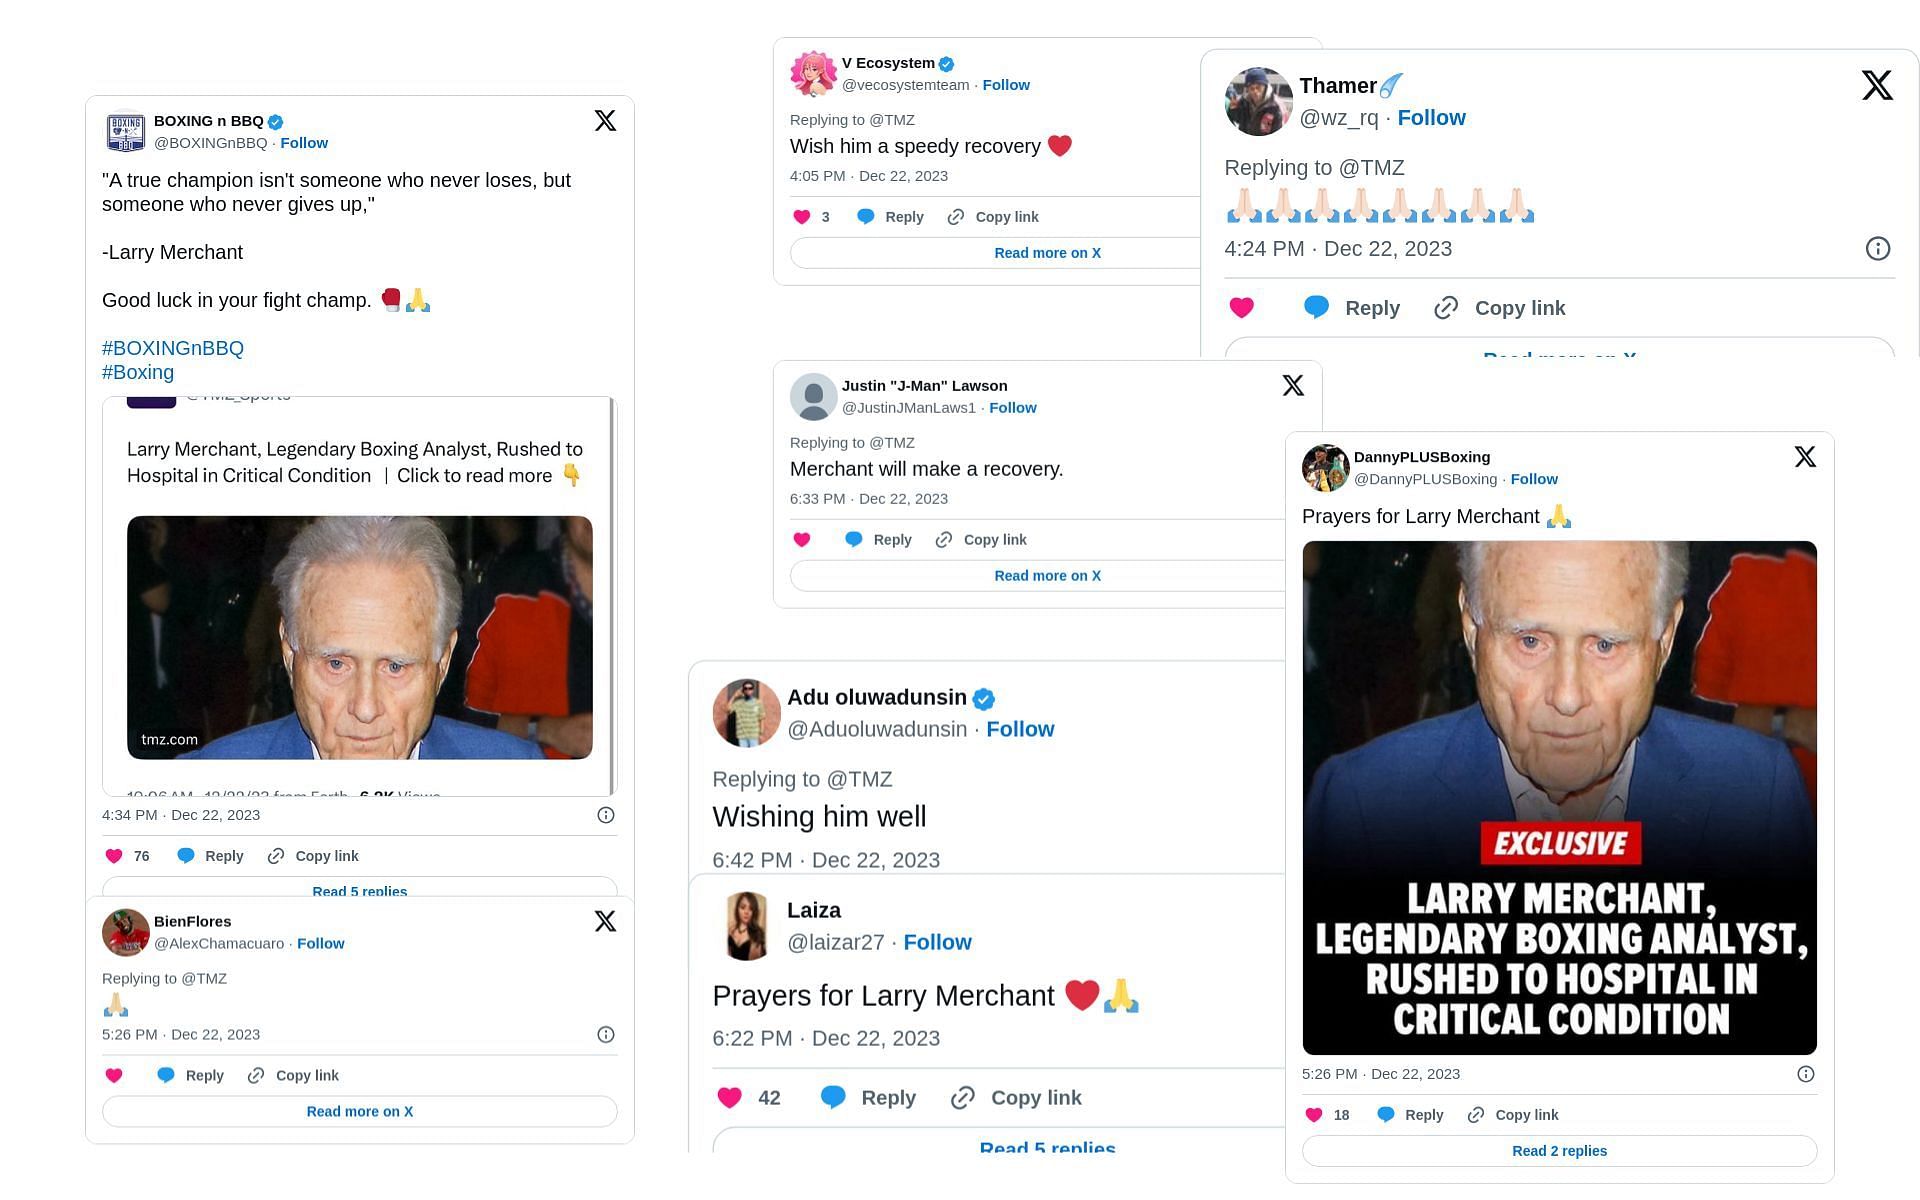 fans pray for the speedy recovery of Larry Merchant